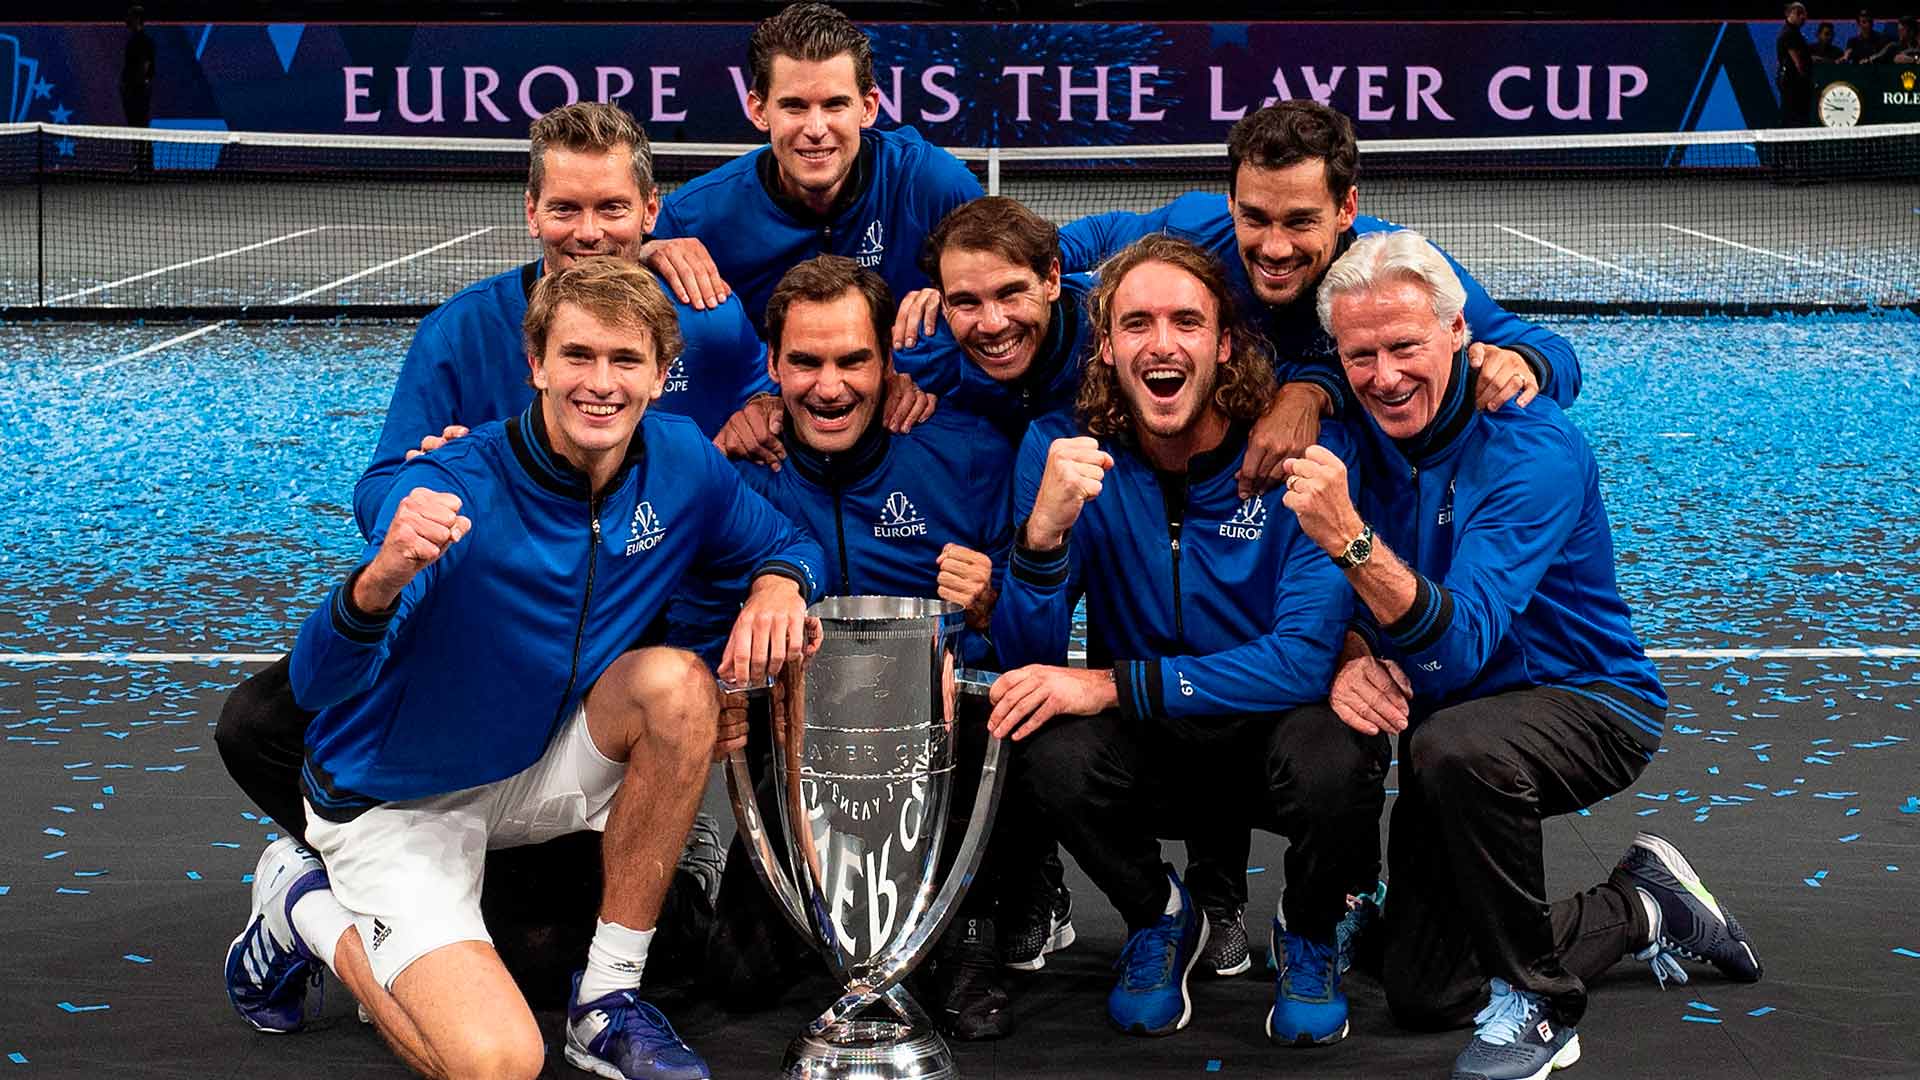 Laver Cup 2021: Date, format, teams, venue for Team Europe vs Team World | Sporting News Australia